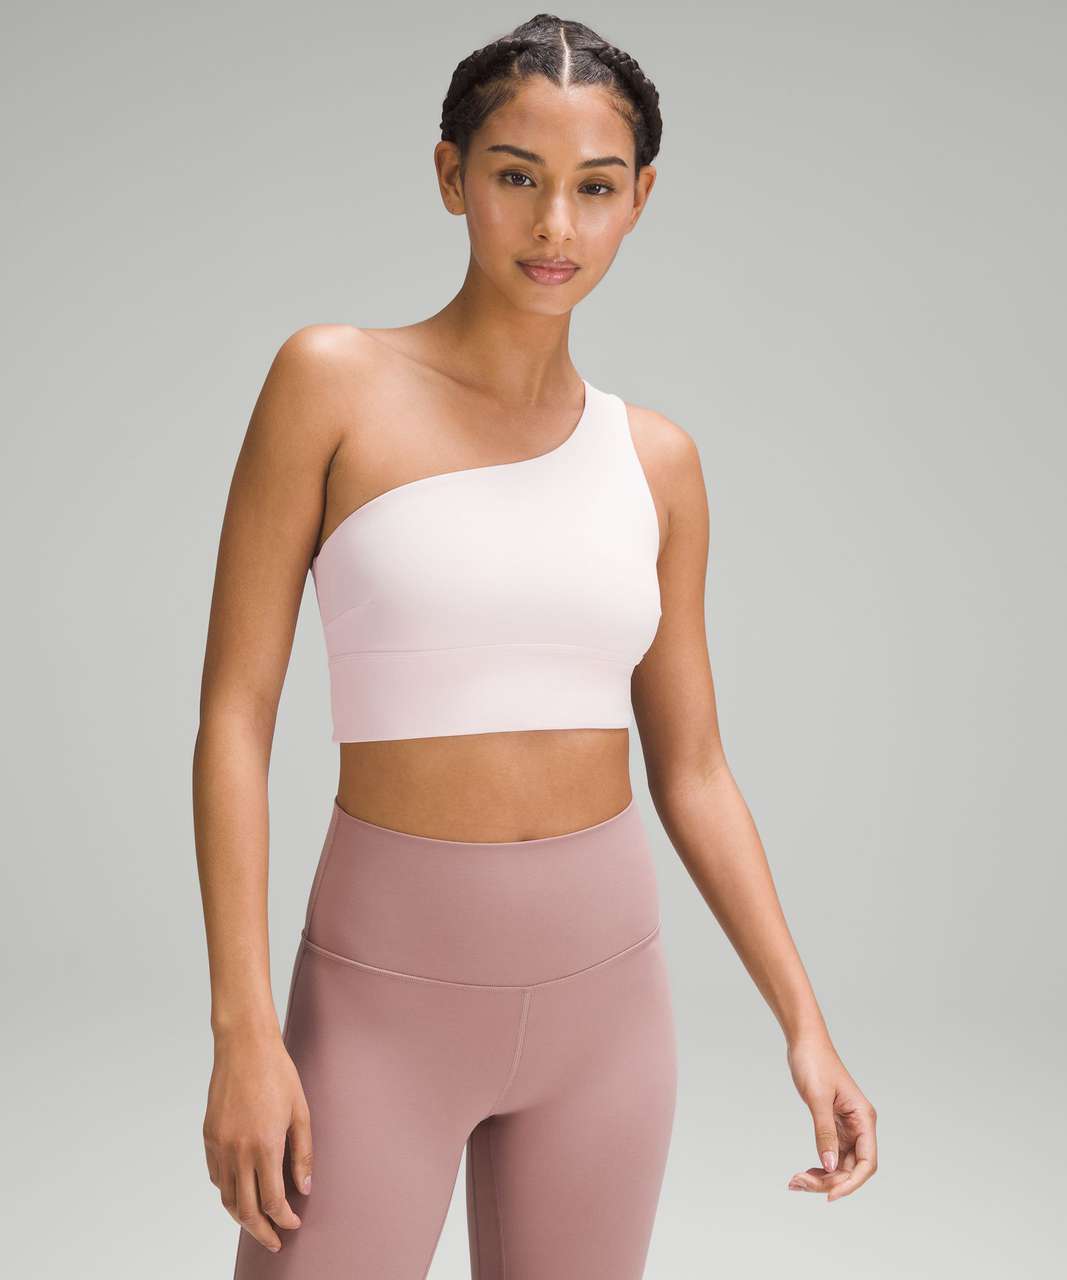 Lululemon Align Asymmetrical Bra Pink - $41 New With Tags - From A